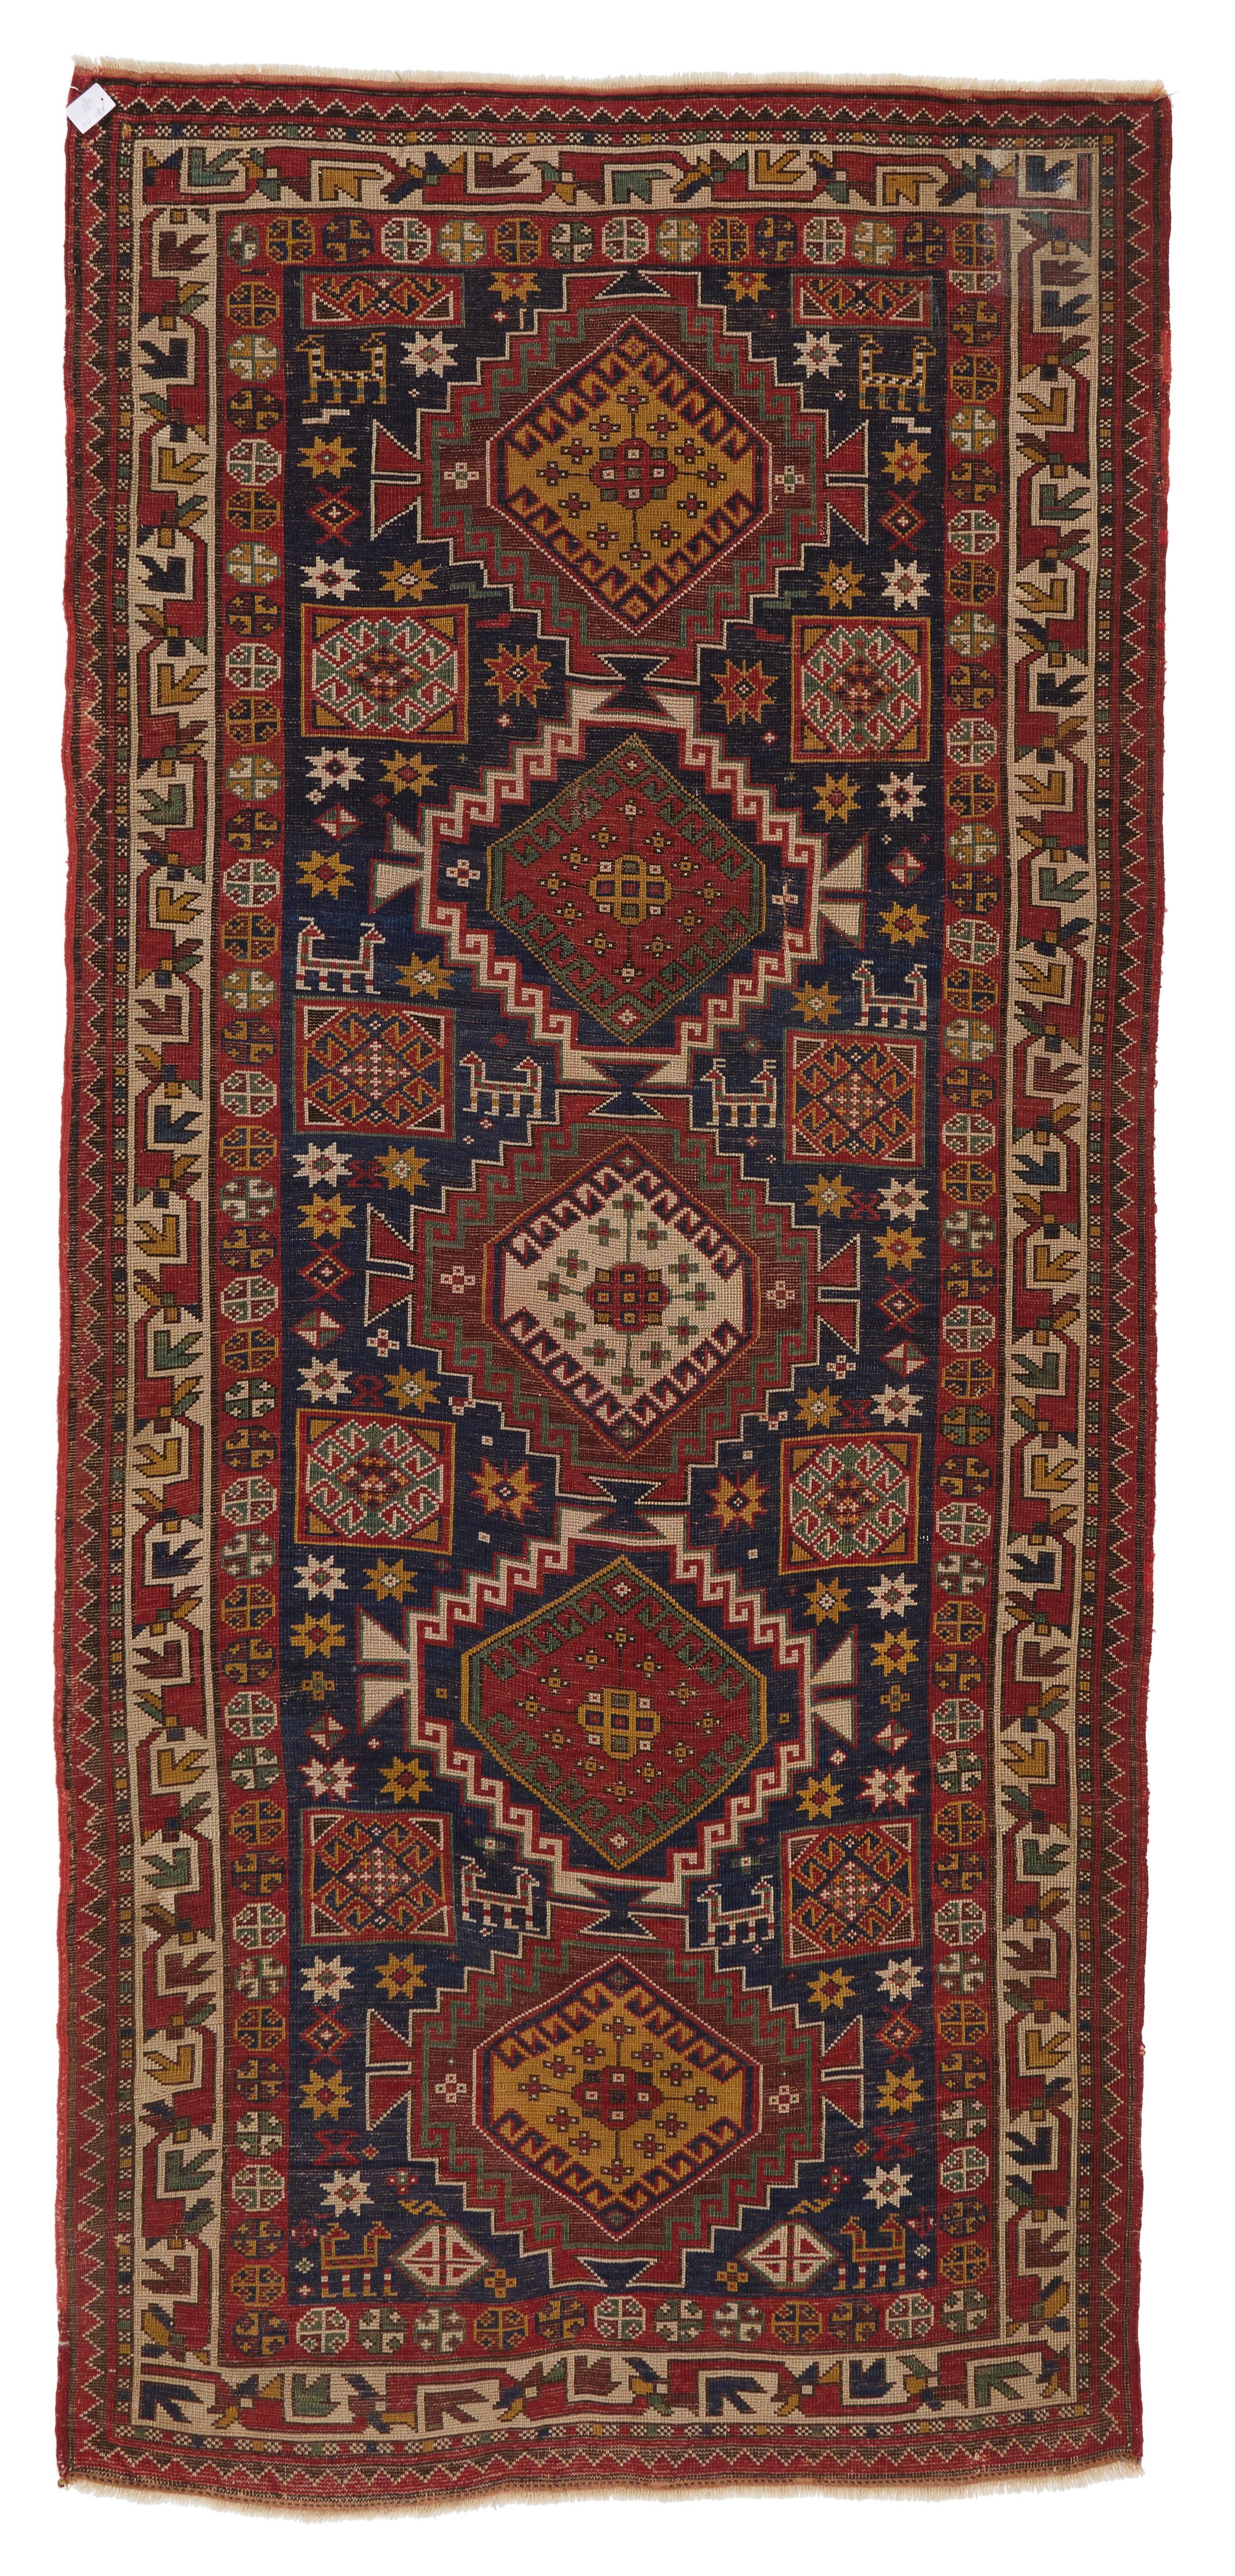 This exquisite KAZAK ANTIQUE RUG from the late 19th century features a stunning selection of geometric motifs, expertly hand-knotted from the finest 100% wool, and is preserved in excellent condition. A luxurious home accent that adds a touch of